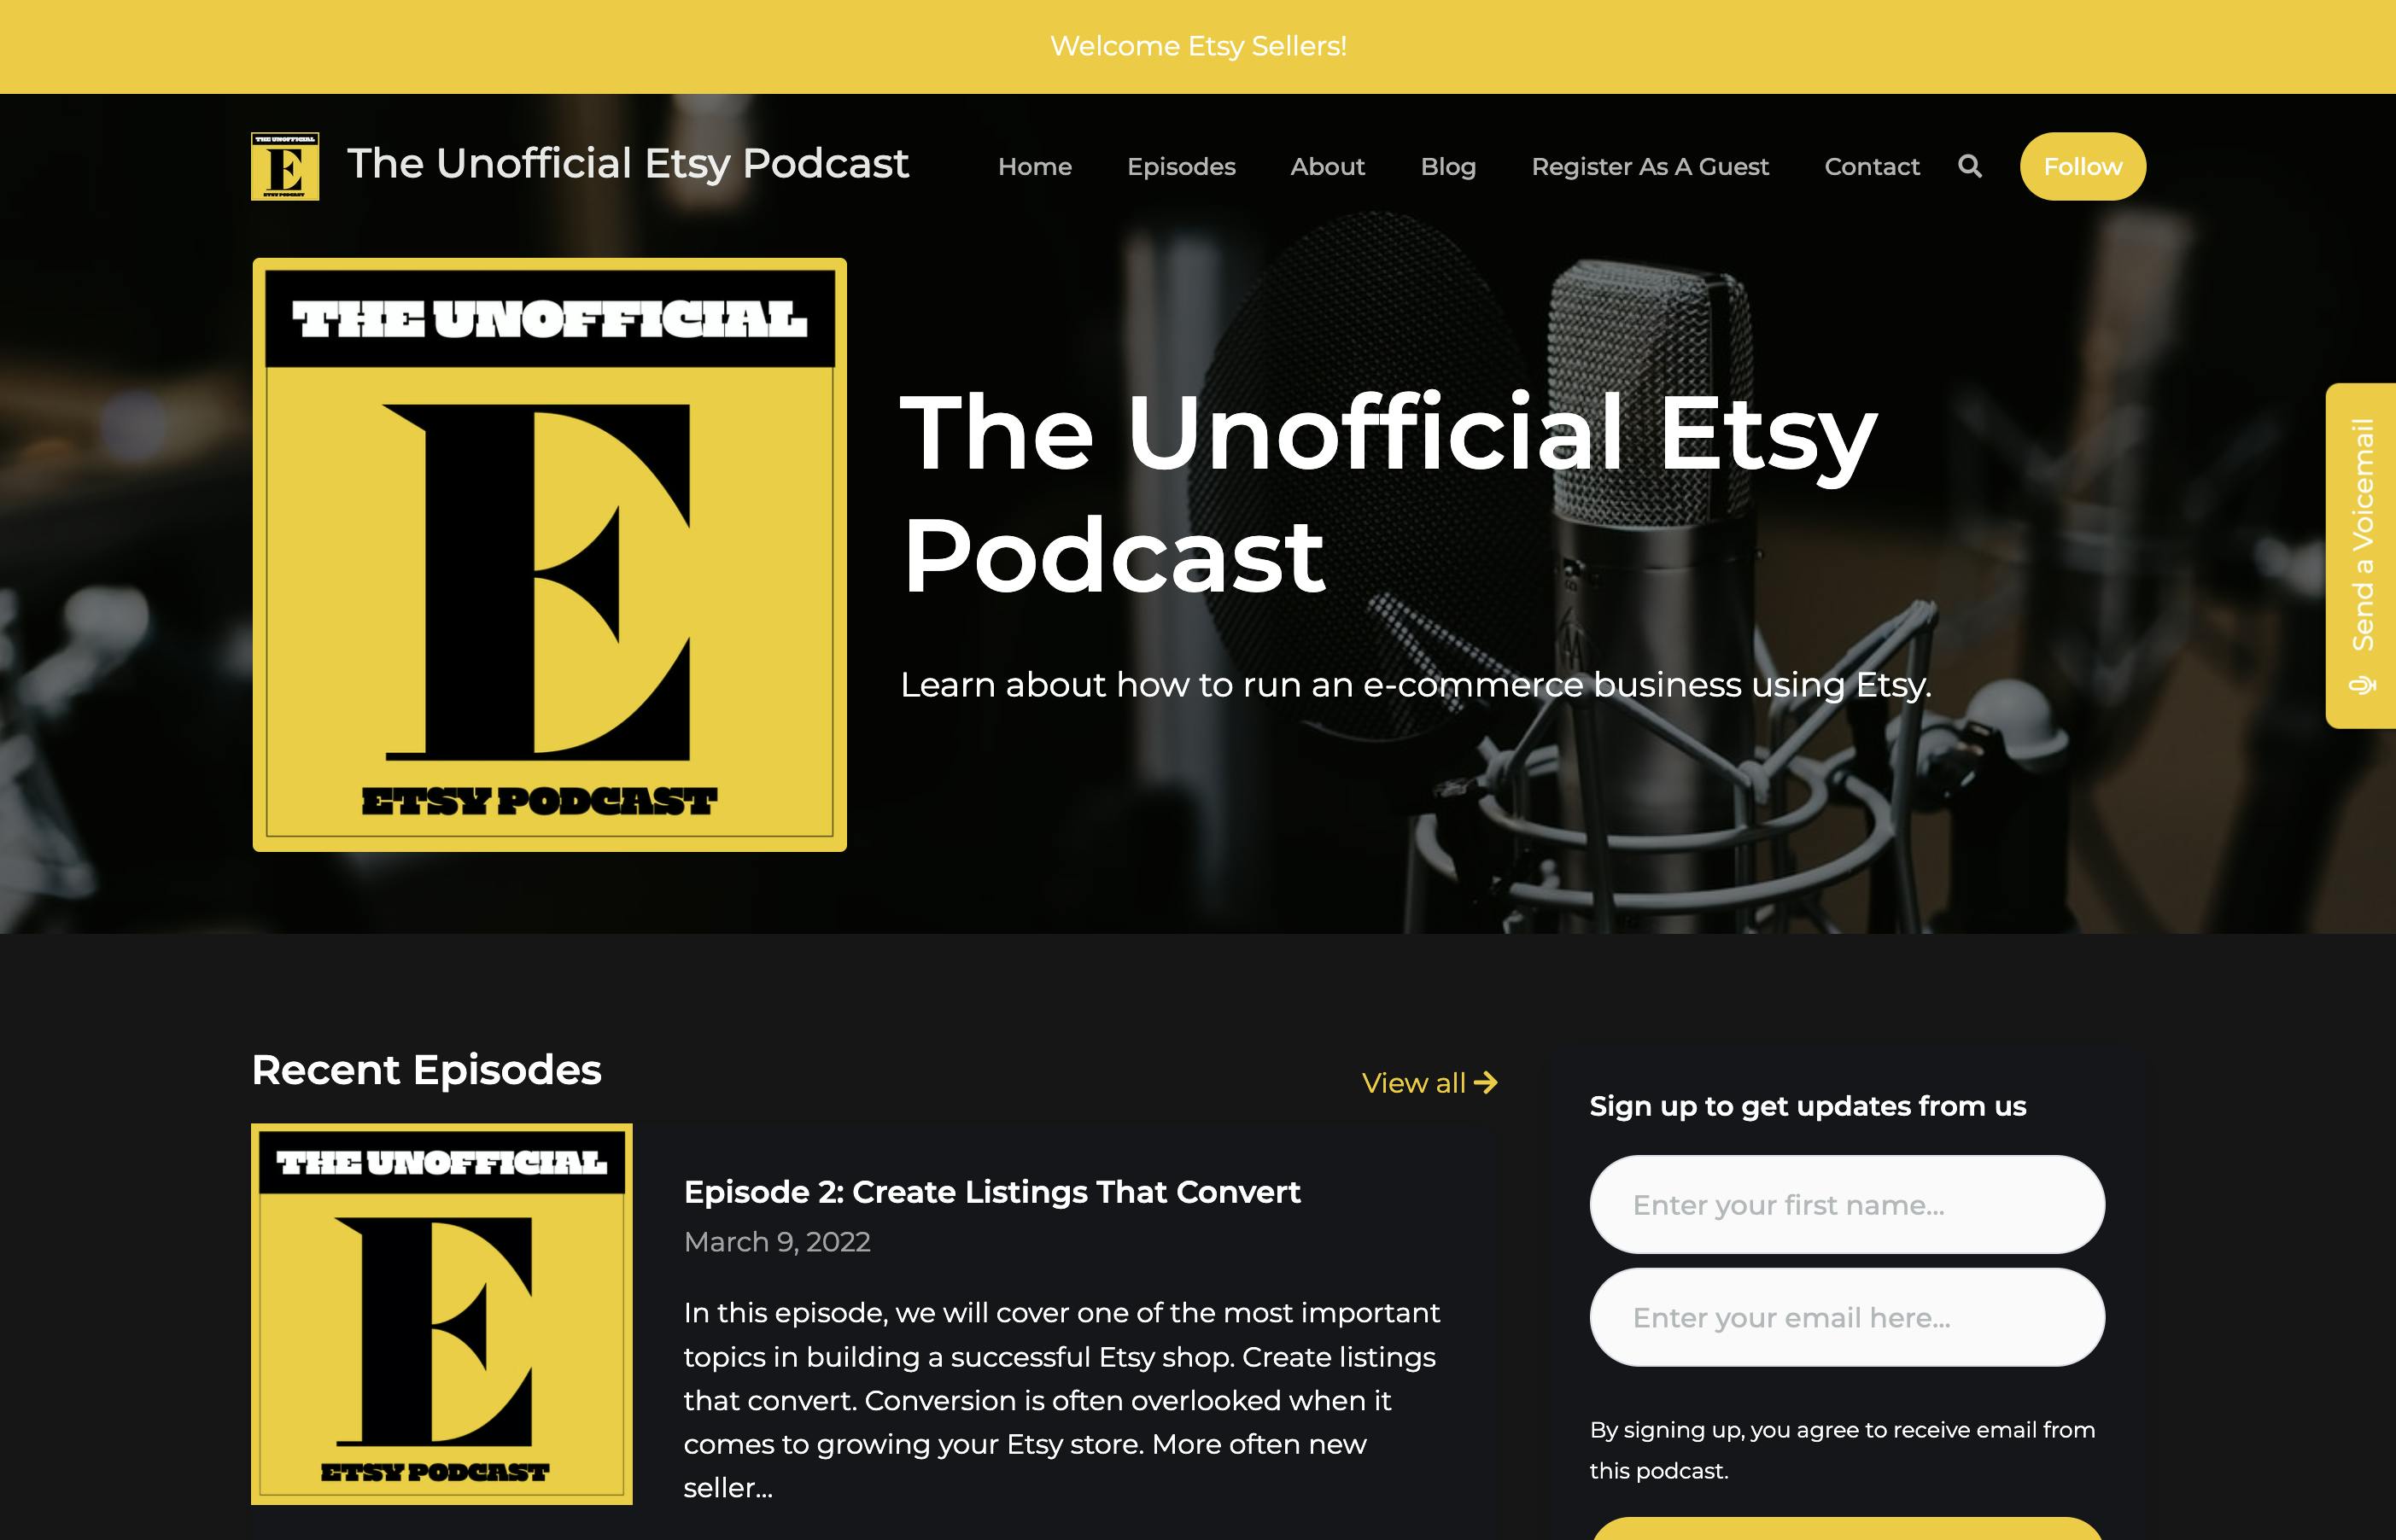 The Unofficial Etsy Podcast homepage